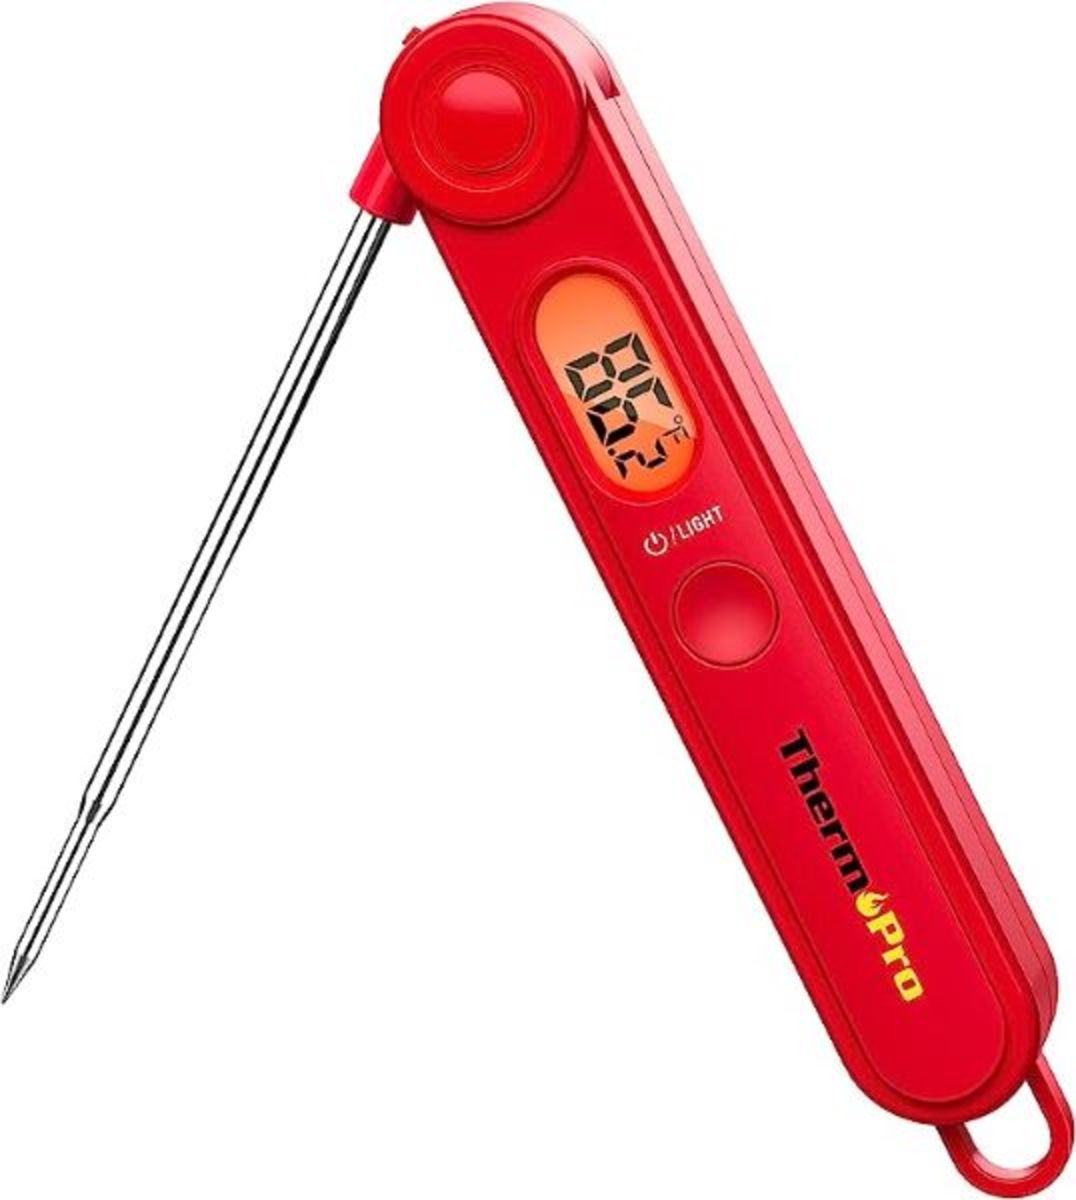 Red digital meat thermometer